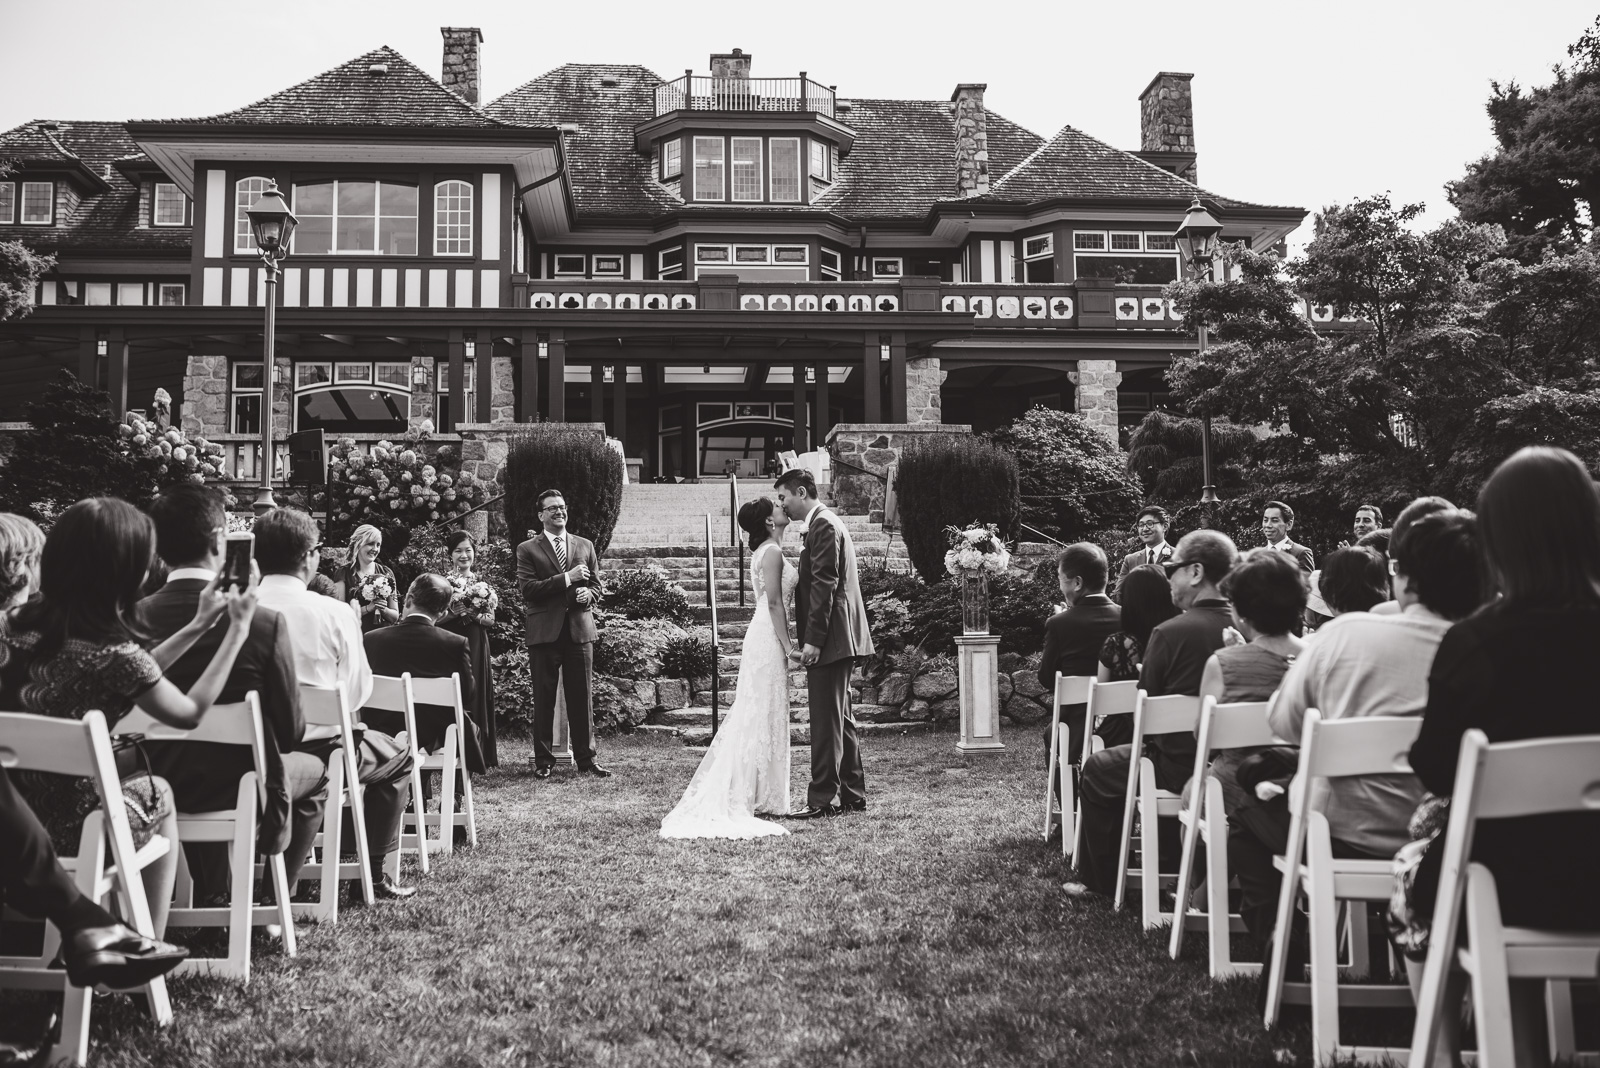 wedding first kiss at cecil green park house on ubc campus in vancouver - victoria wedding photographers